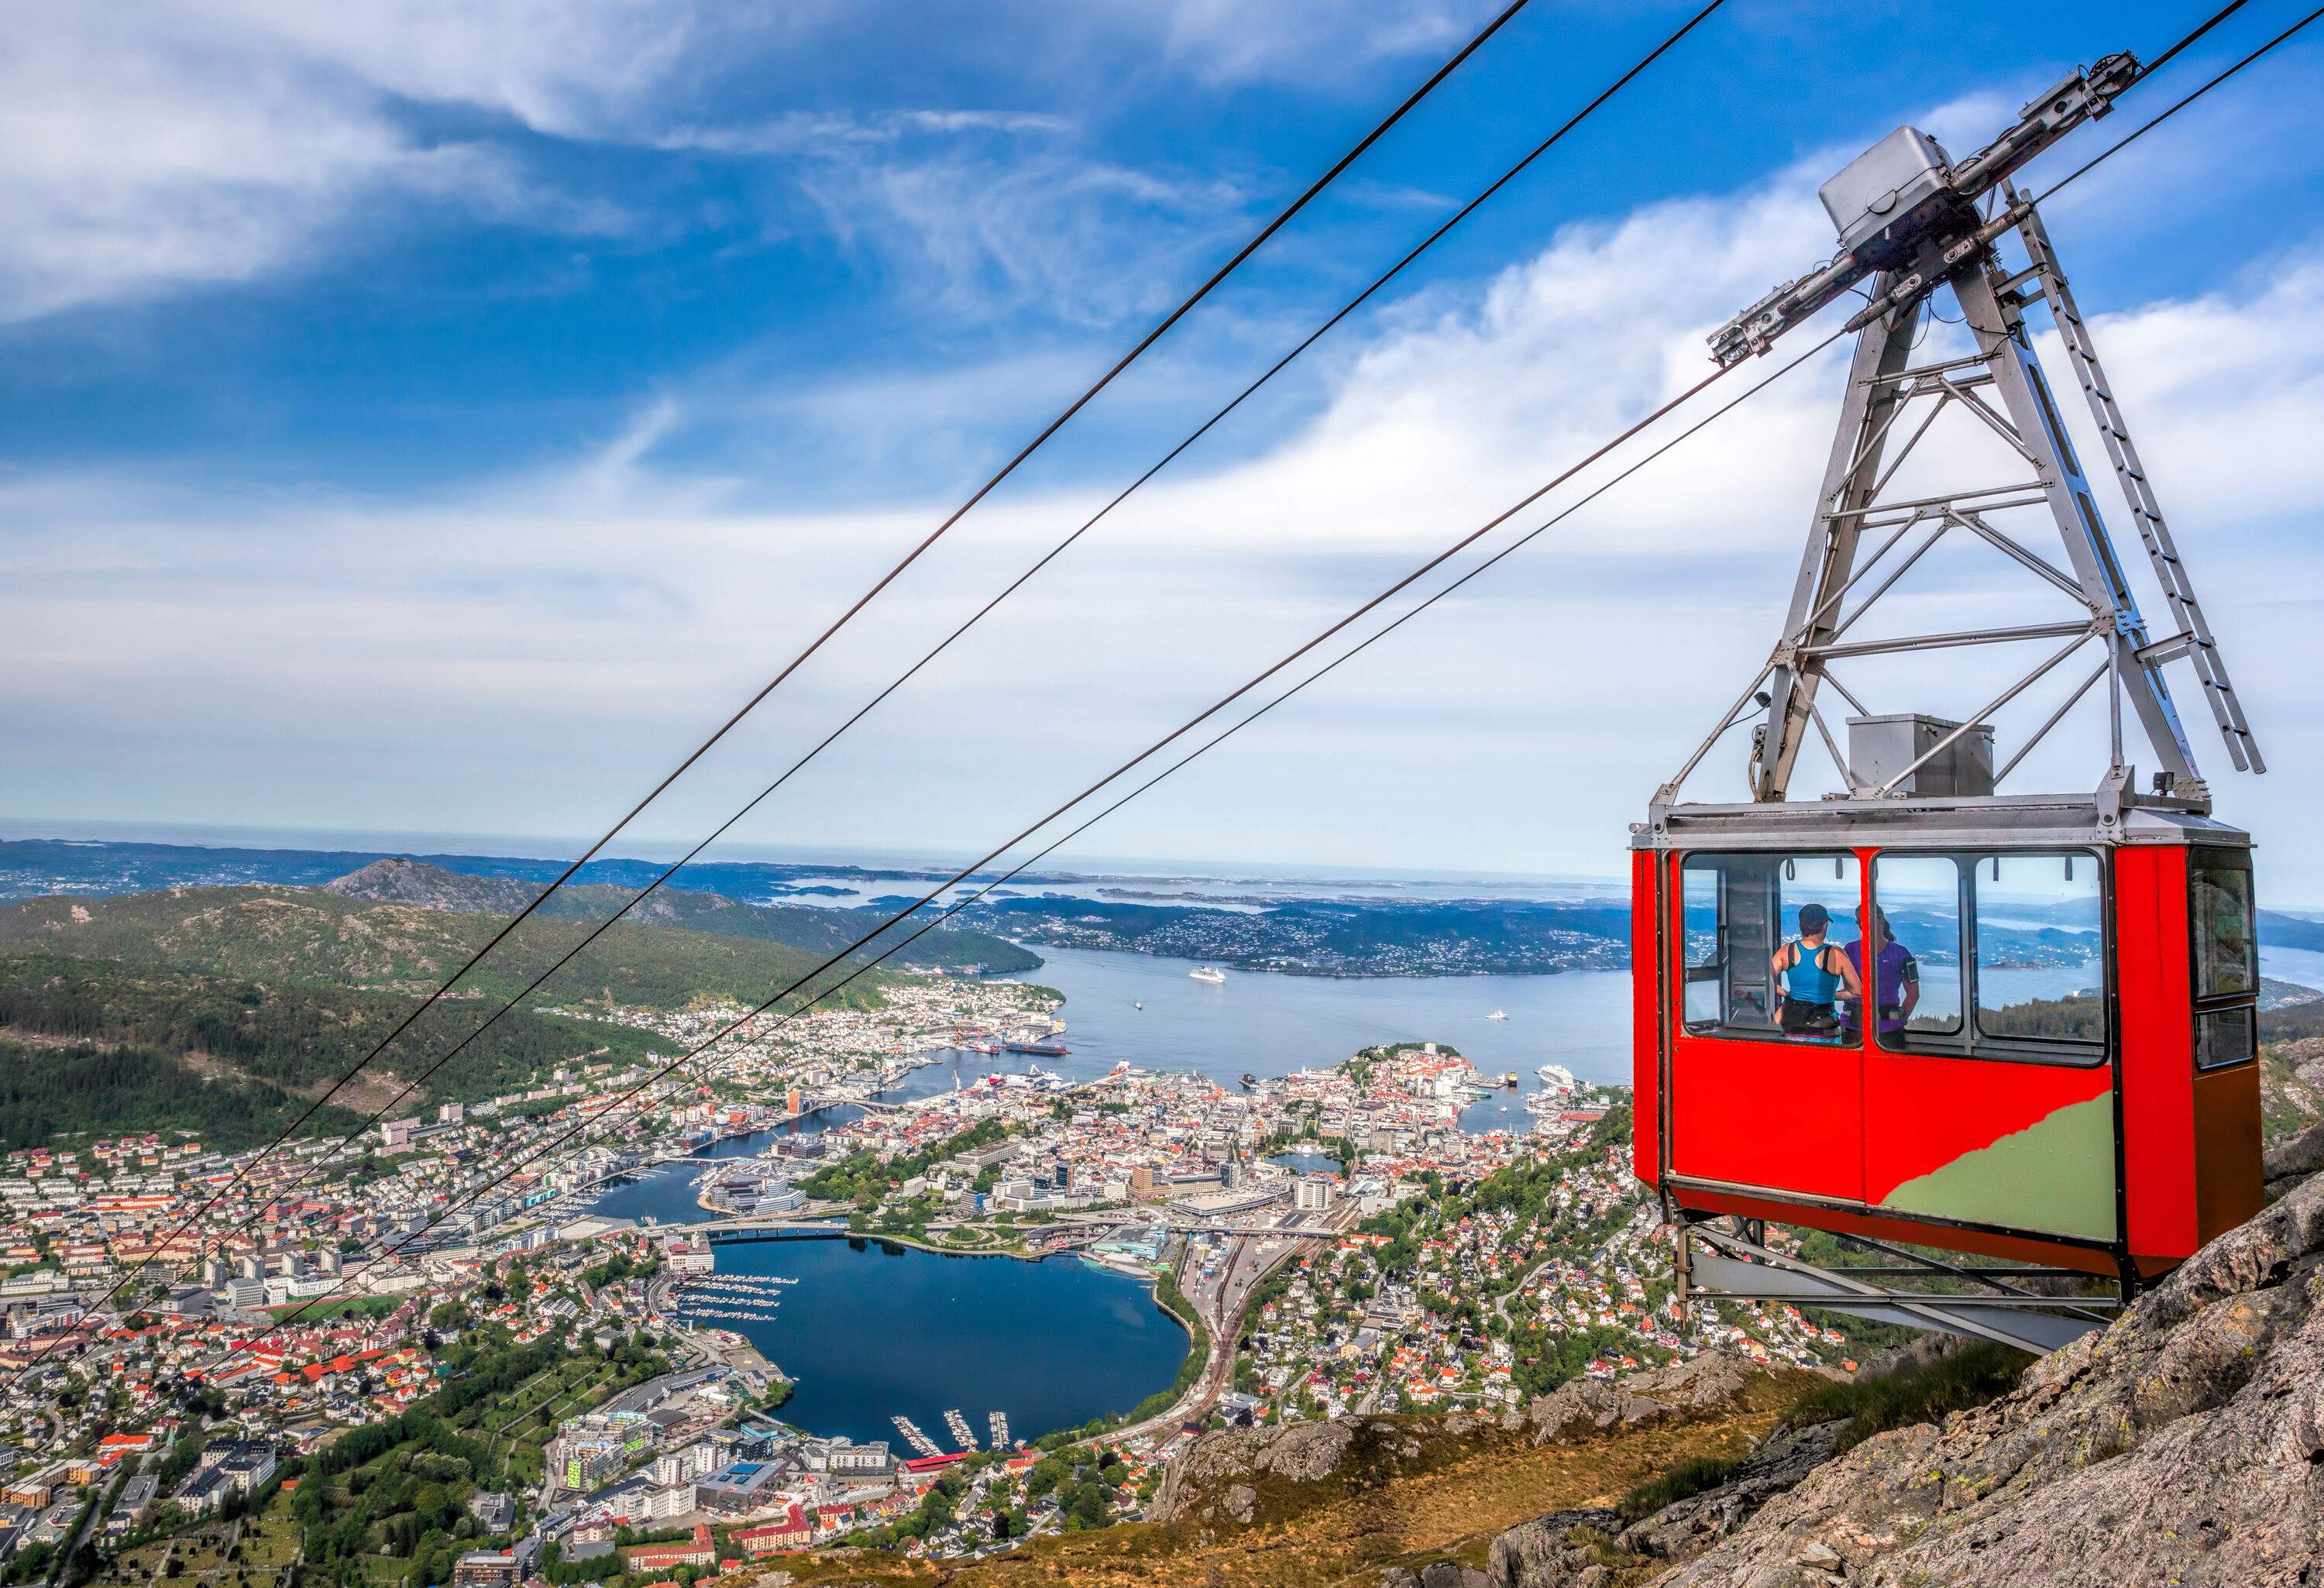 A cable car transporting two passengers descending a hillside with a populated coastal town below.